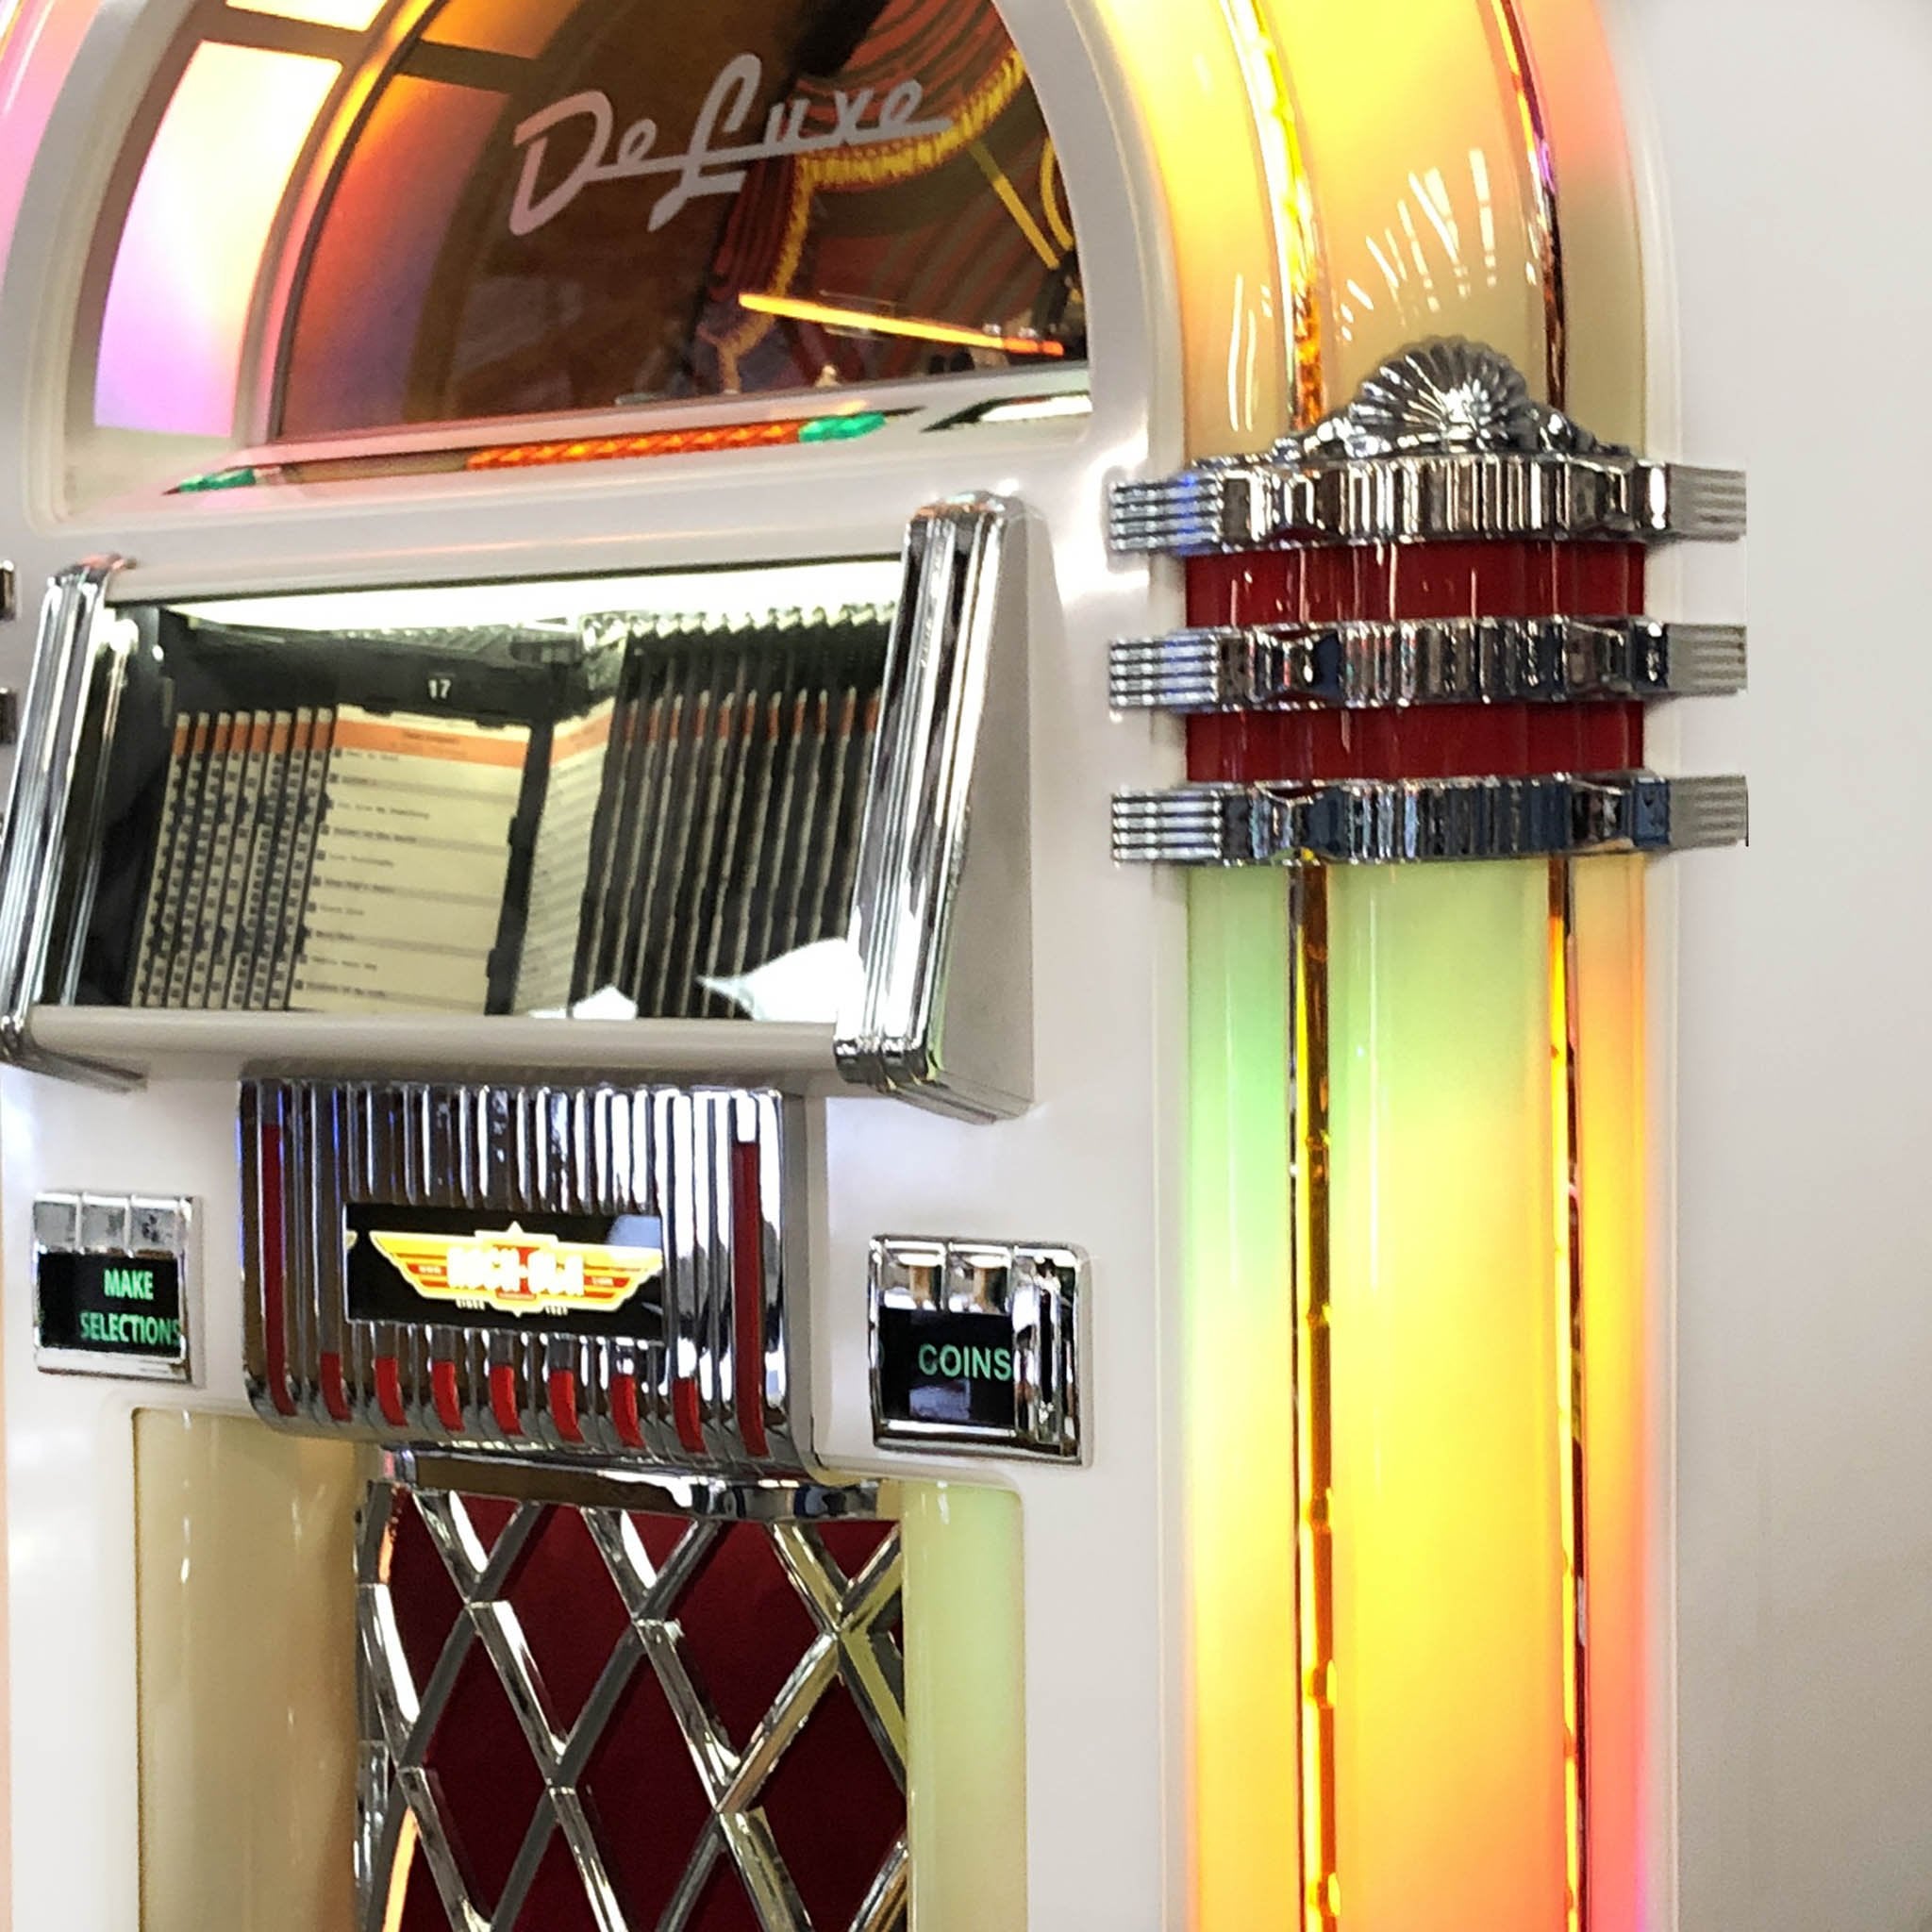 Rock-Ola Bubbler CD Jukebox in Gloss White with Bluetooth